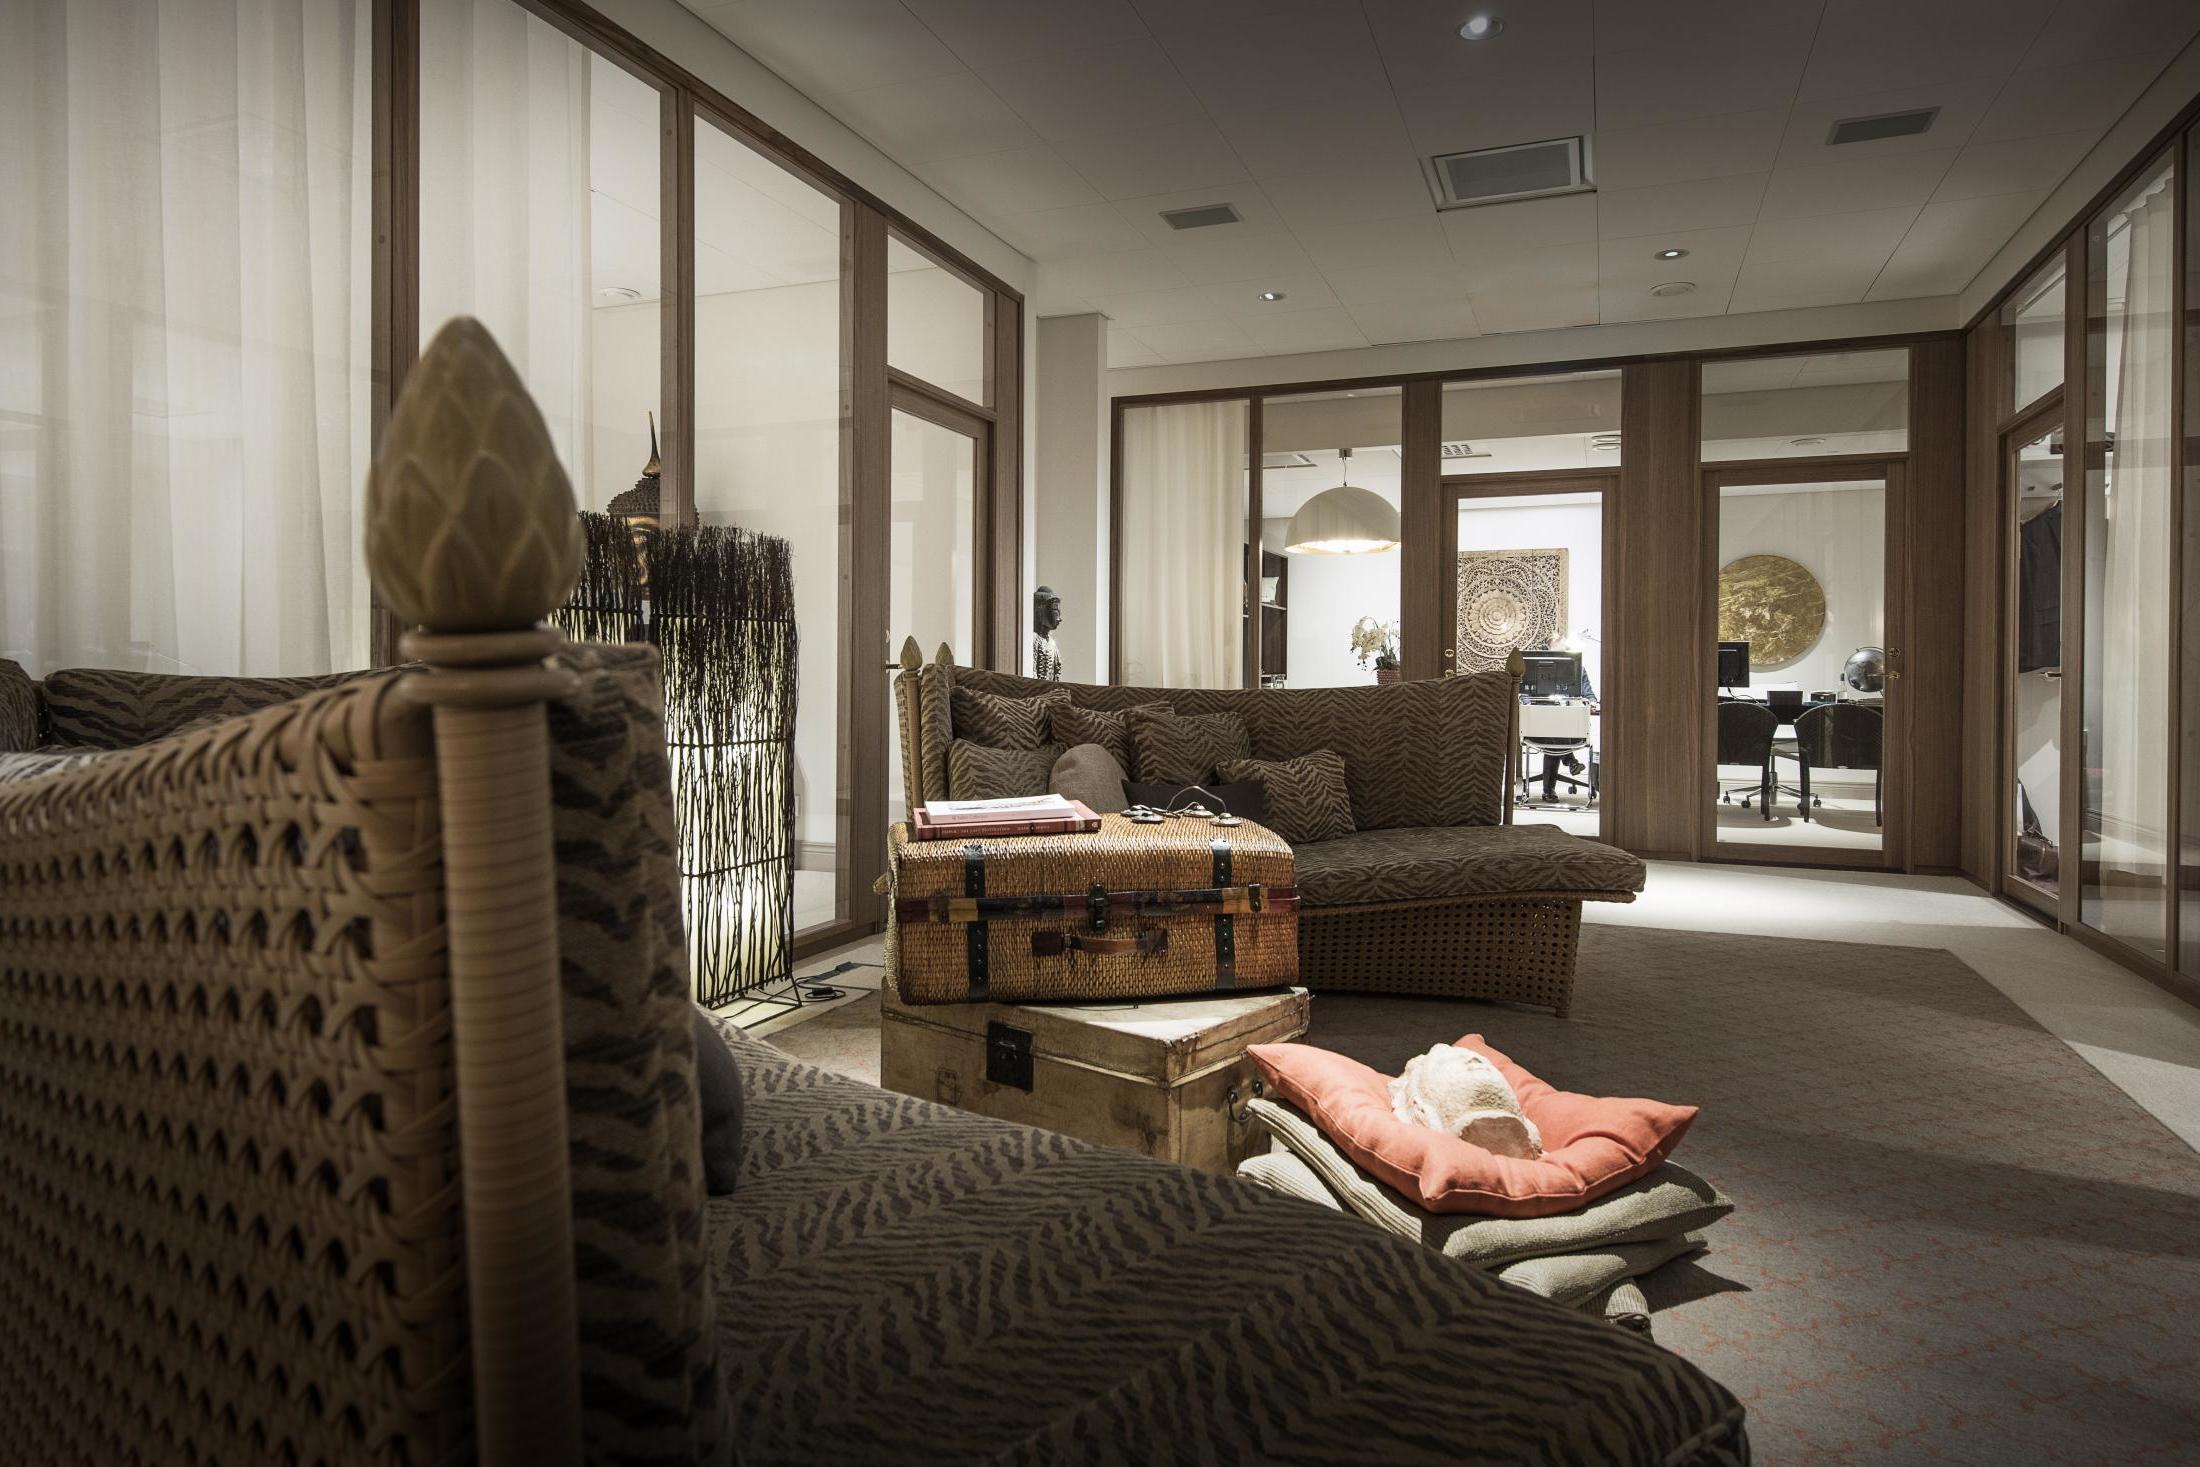 Select Collection has a day spa and cool interiors (Lars Nystrom )